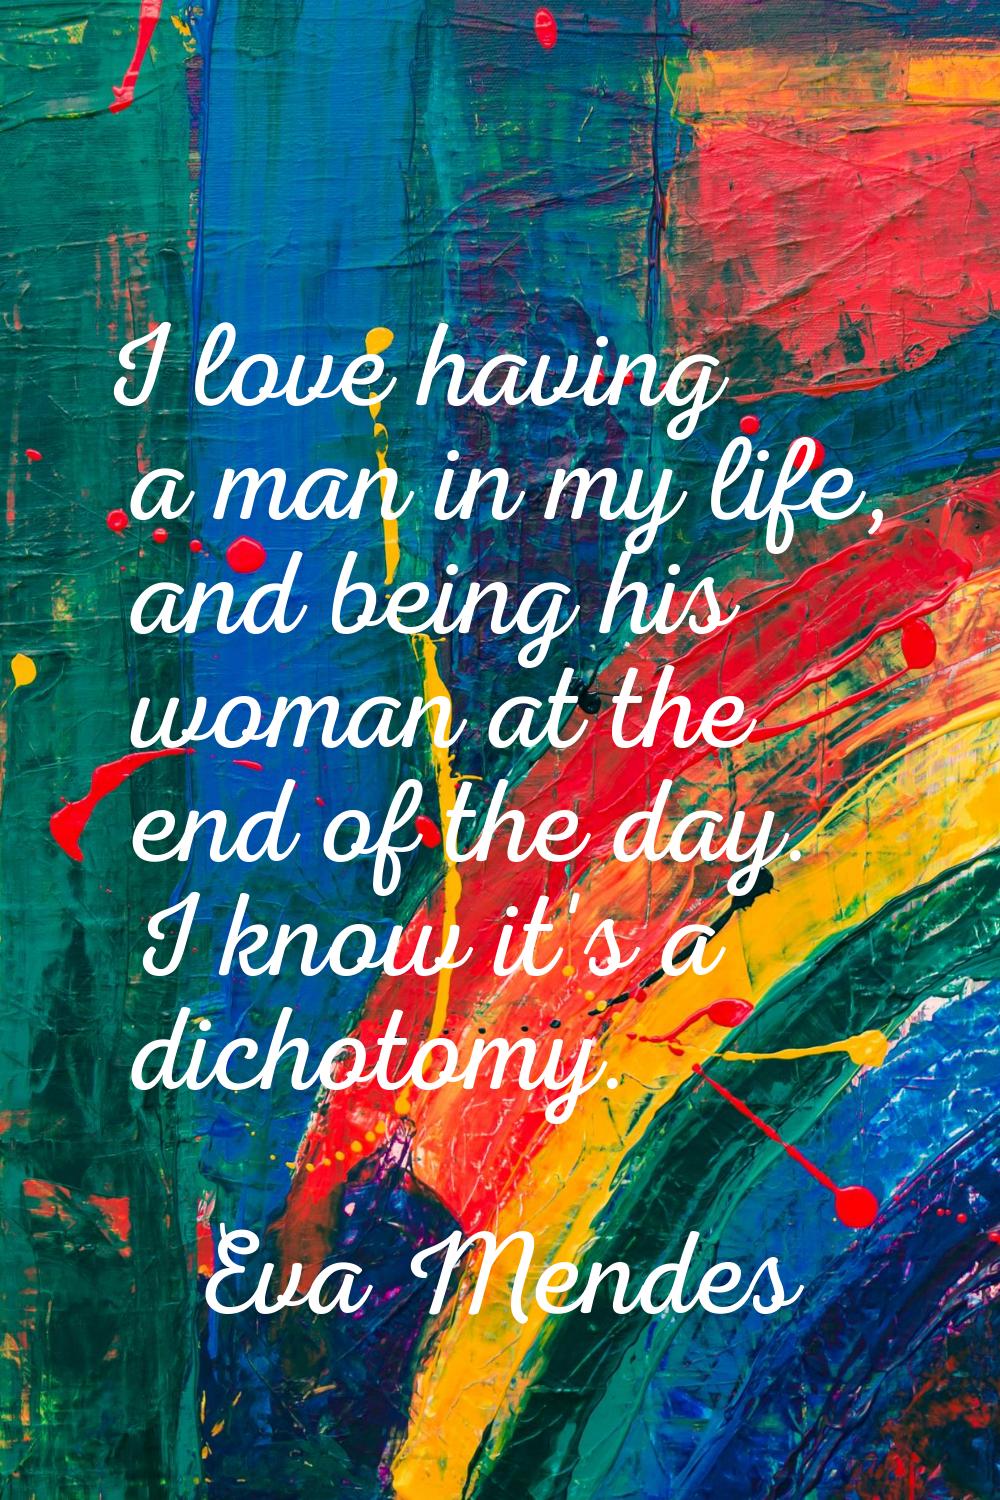 I love having a man in my life, and being his woman at the end of the day. I know it's a dichotomy.